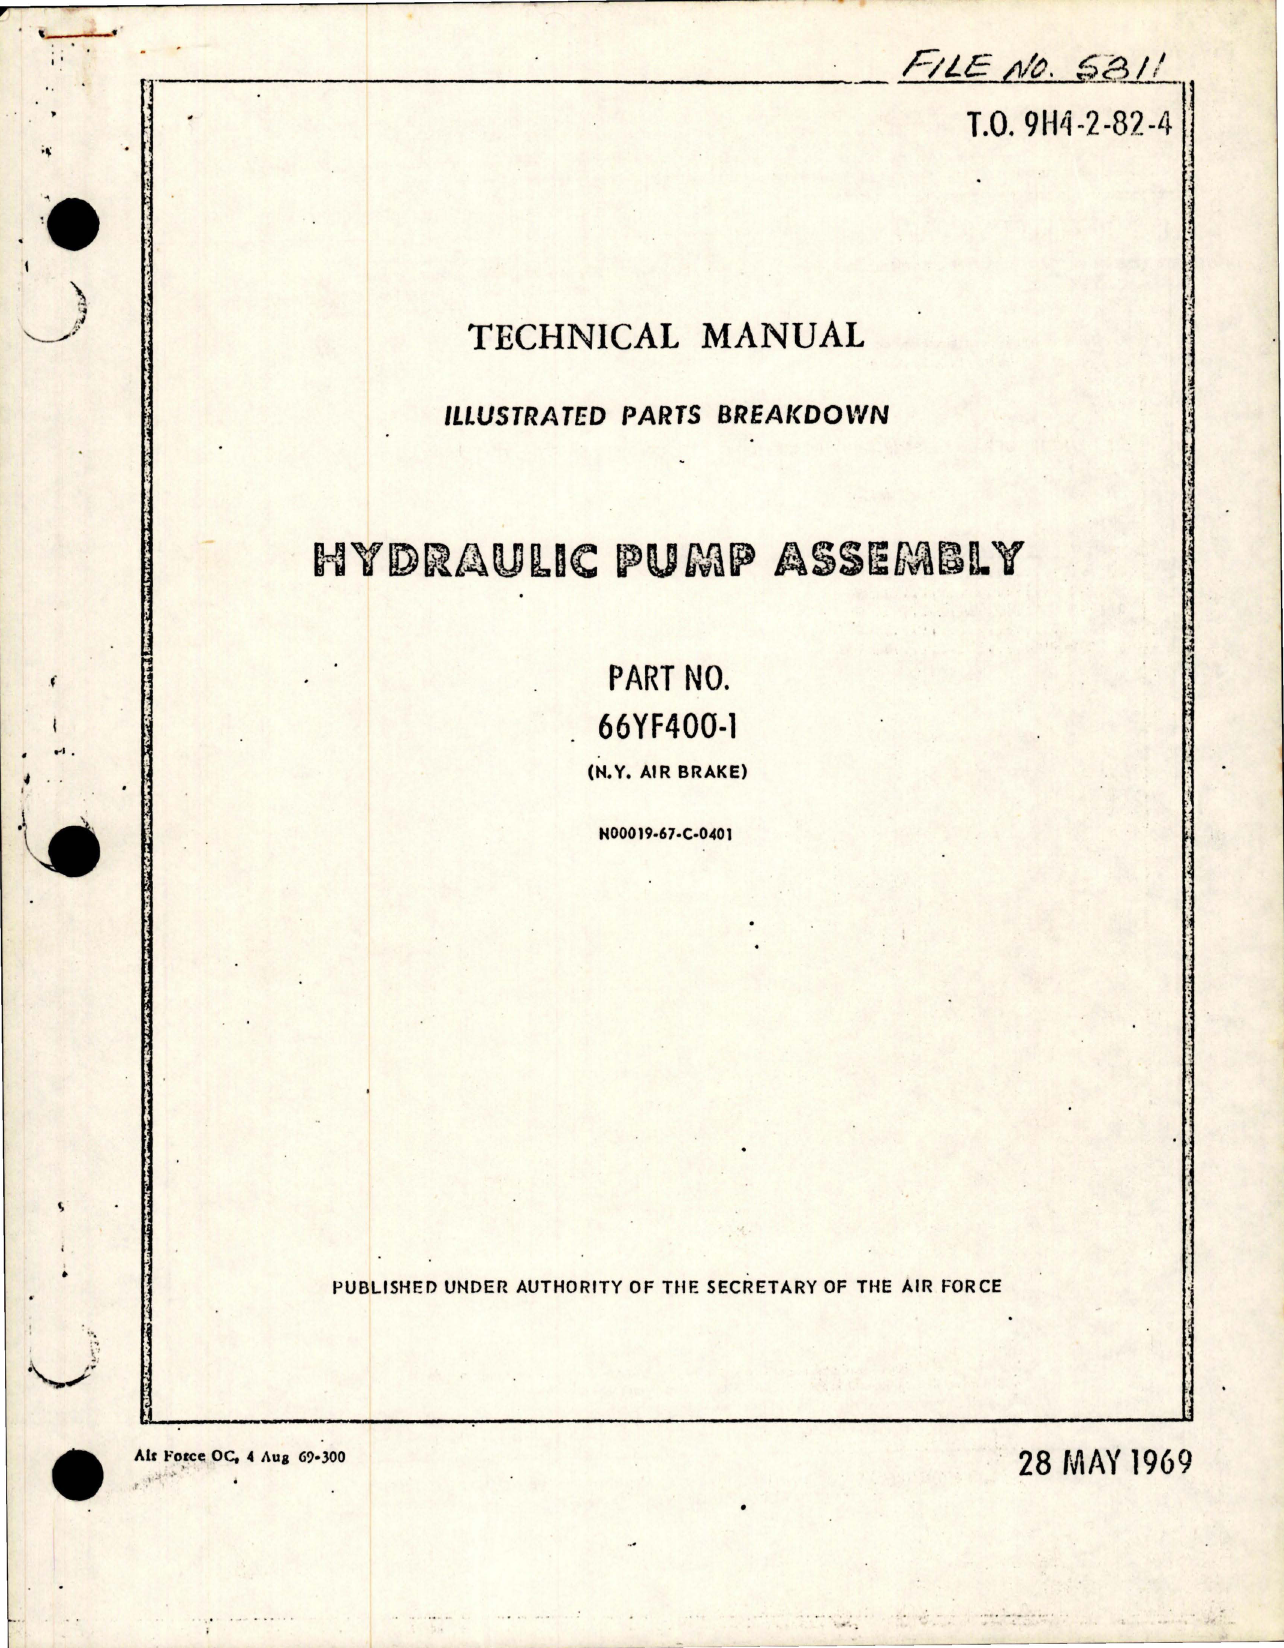 Sample page 1 from AirCorps Library document: Illustrated Parts Breakdown for Hydraulic Pump Assembly - Part 66YF400-1 